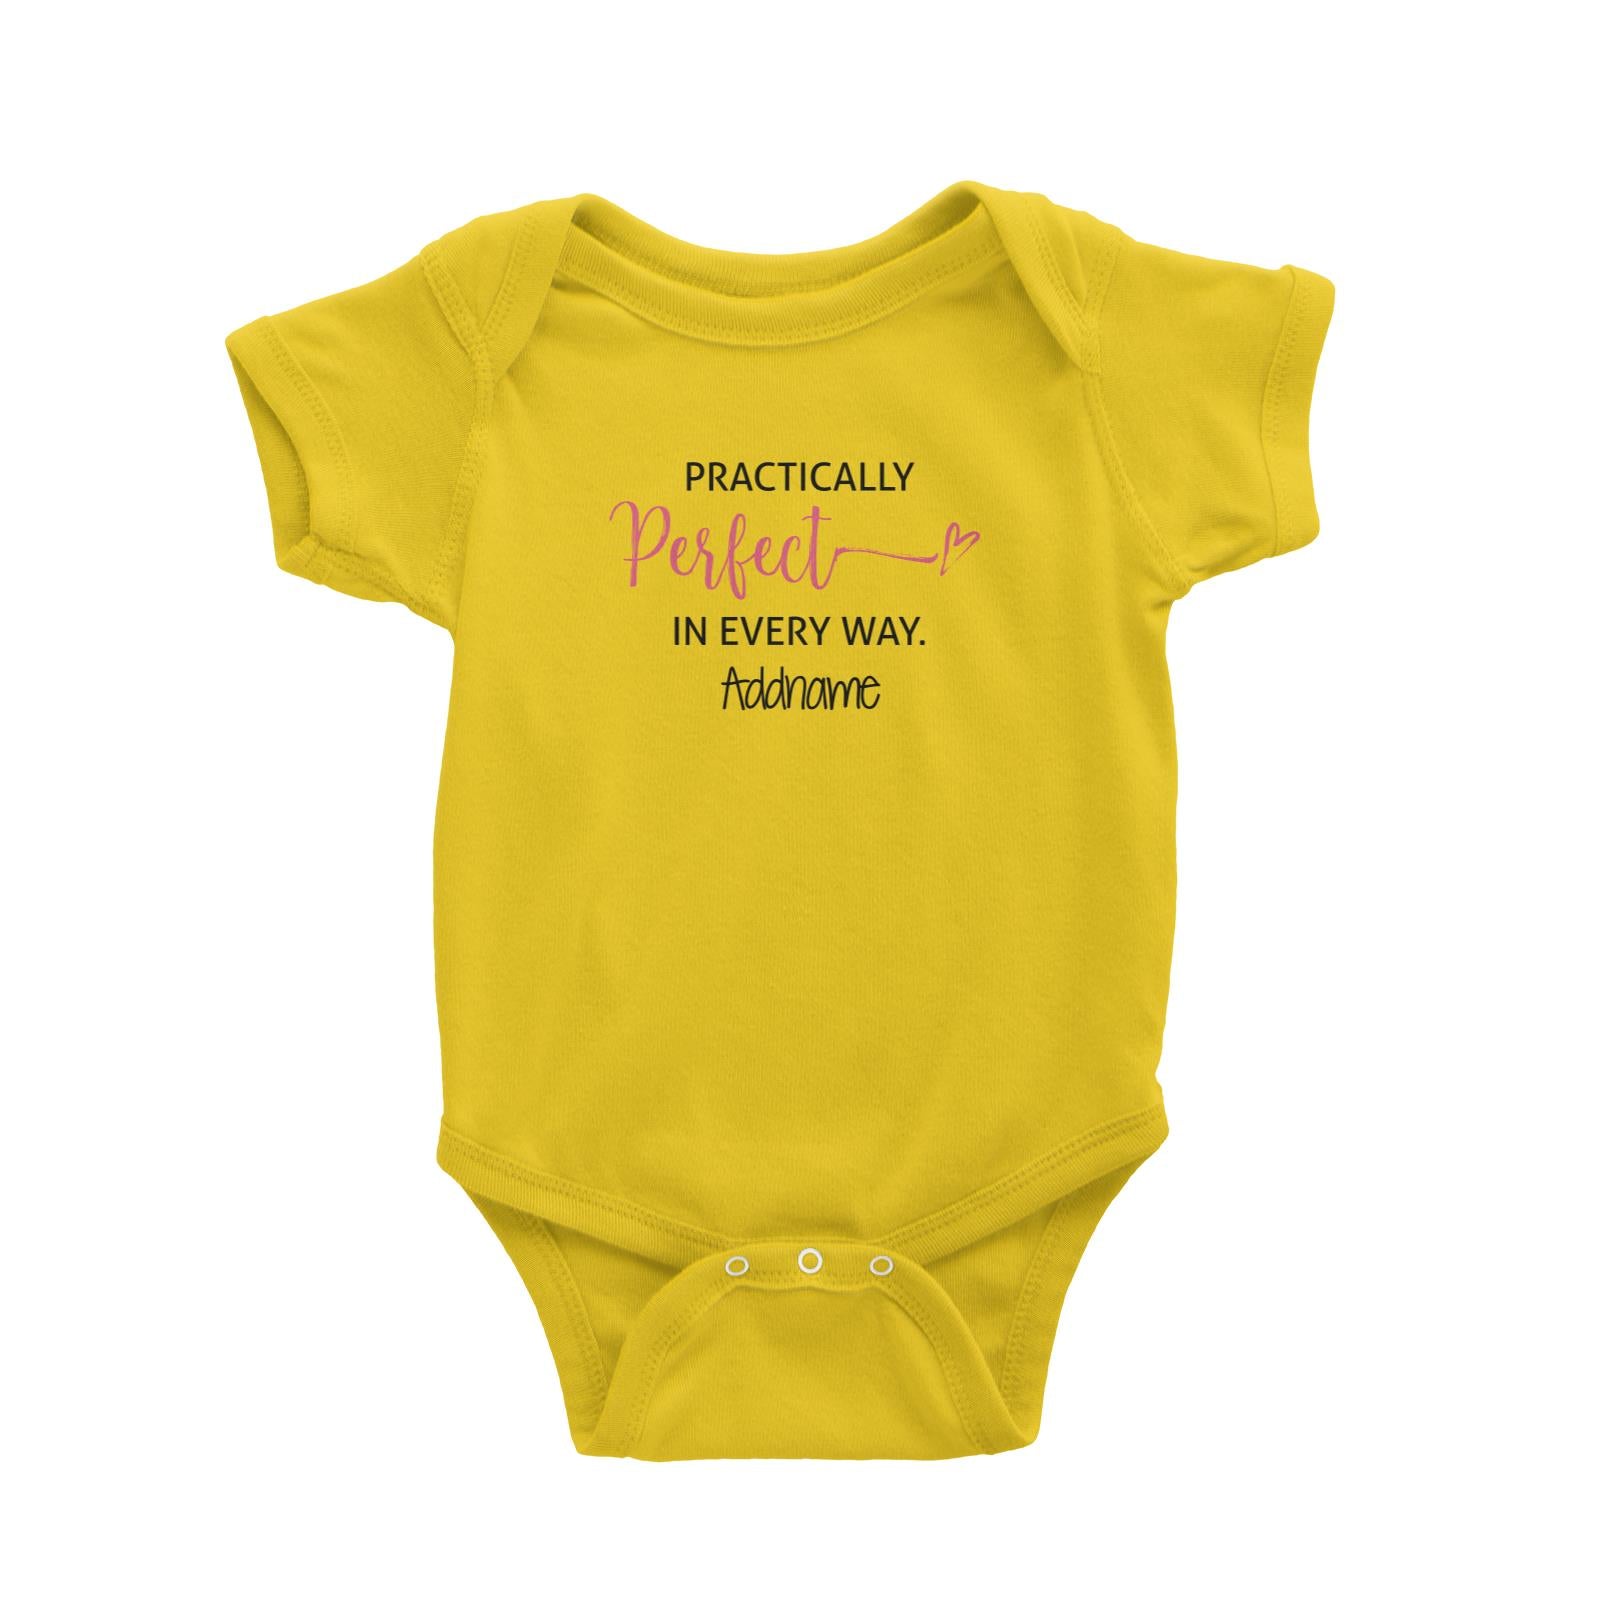 Practically Perfect in Every Way Girls Addname Baby Romper